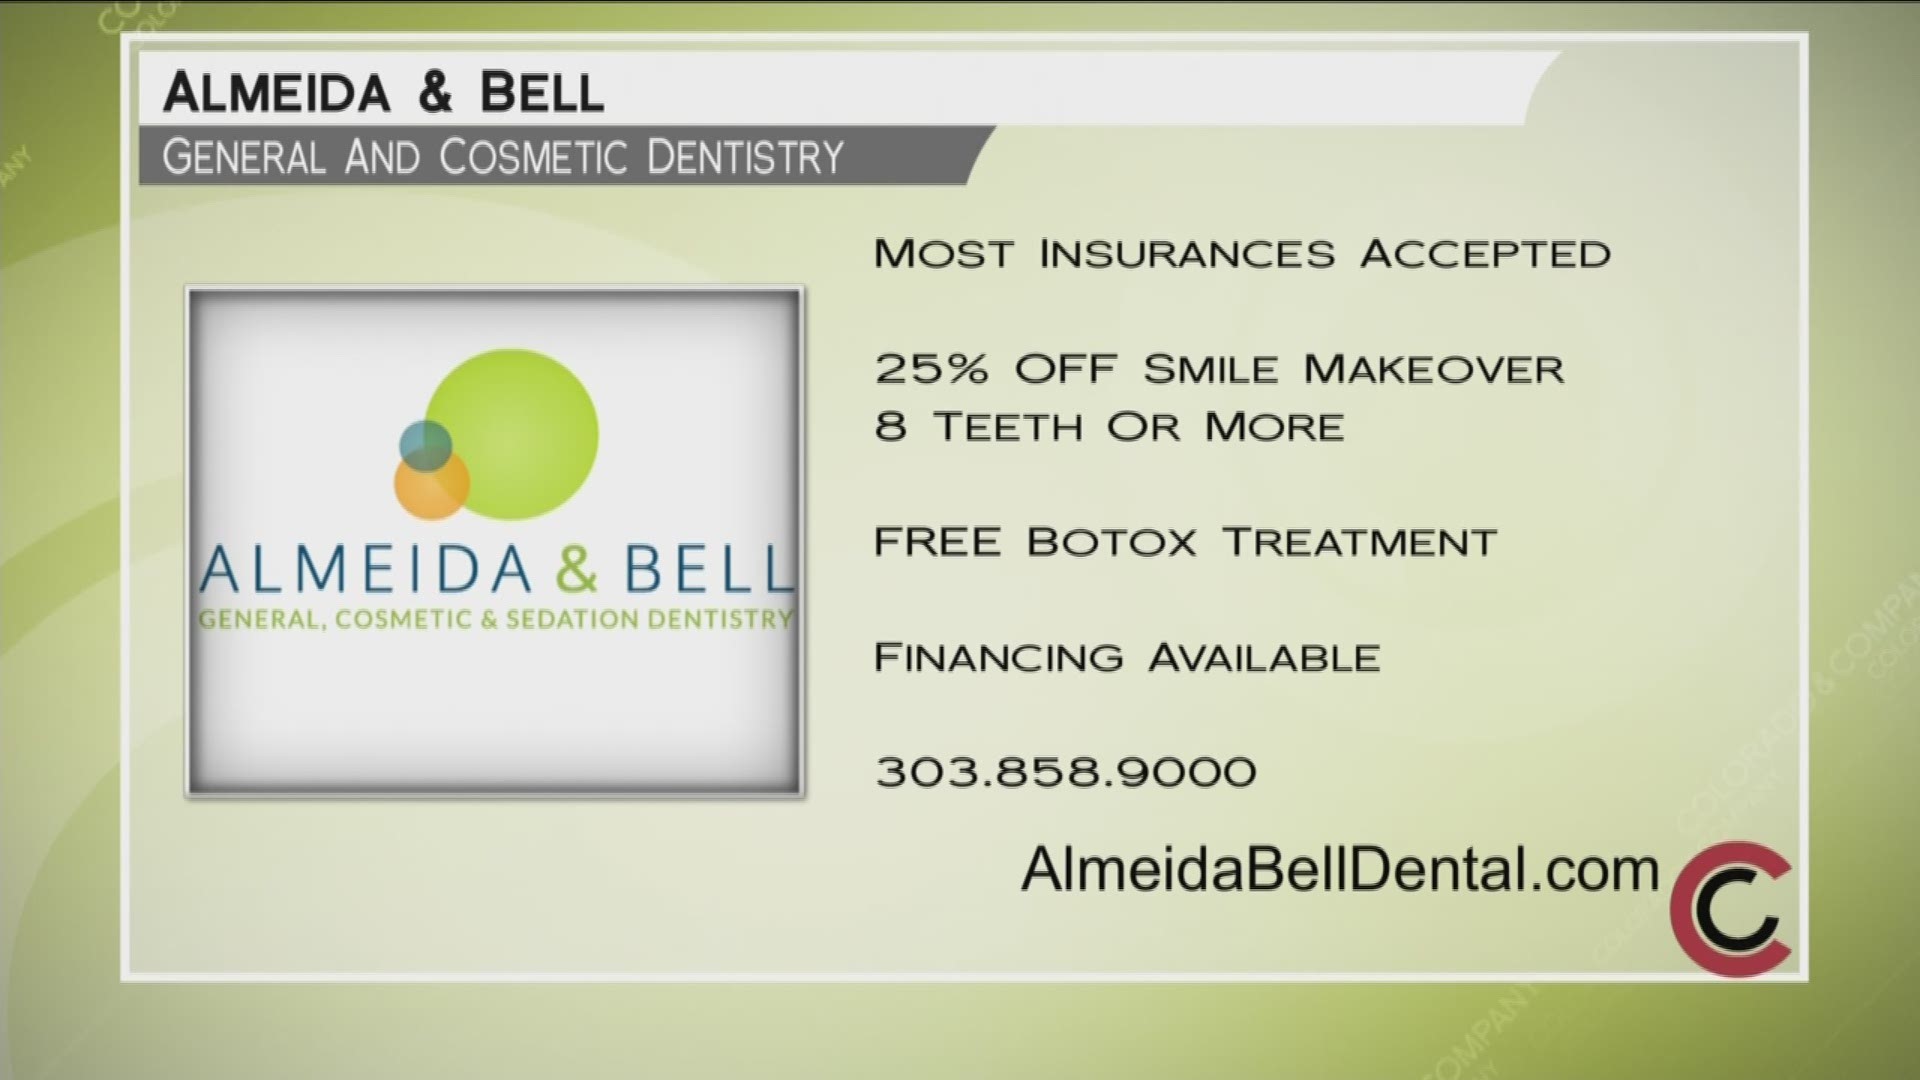 The first 10 callers to Almeida and Bell at 303.858.9000 who complete a smile makeover will get 25% off 8 teeth or more, plus a free Botox treatment! Most insurances are accepted, except Medicare and Medicaid, but financing is available. Visit www.AlmeidaBellDental.com for more information.
THIS INTERVIEW HAS COMMERCIAL CONTENT. PRODUCTS AND SERVICES FEATURED APPEAR AS PAID ADVERTISING.